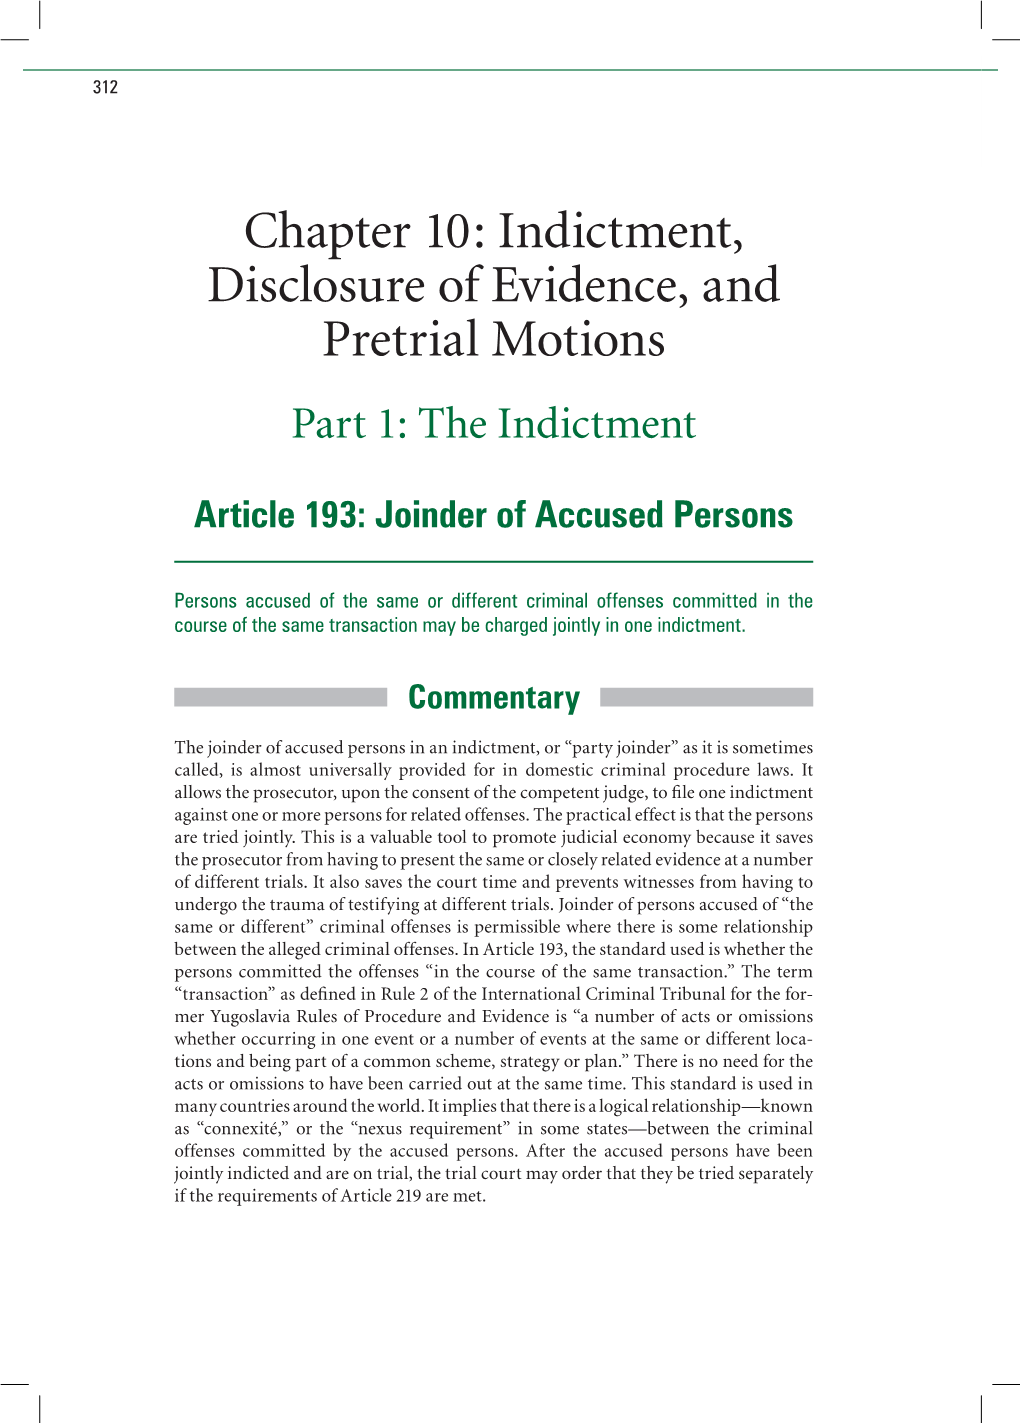 Chapter 10: Indictment, Disclosure of Evidence, and Pretrial Motions Part 1: the Indictment